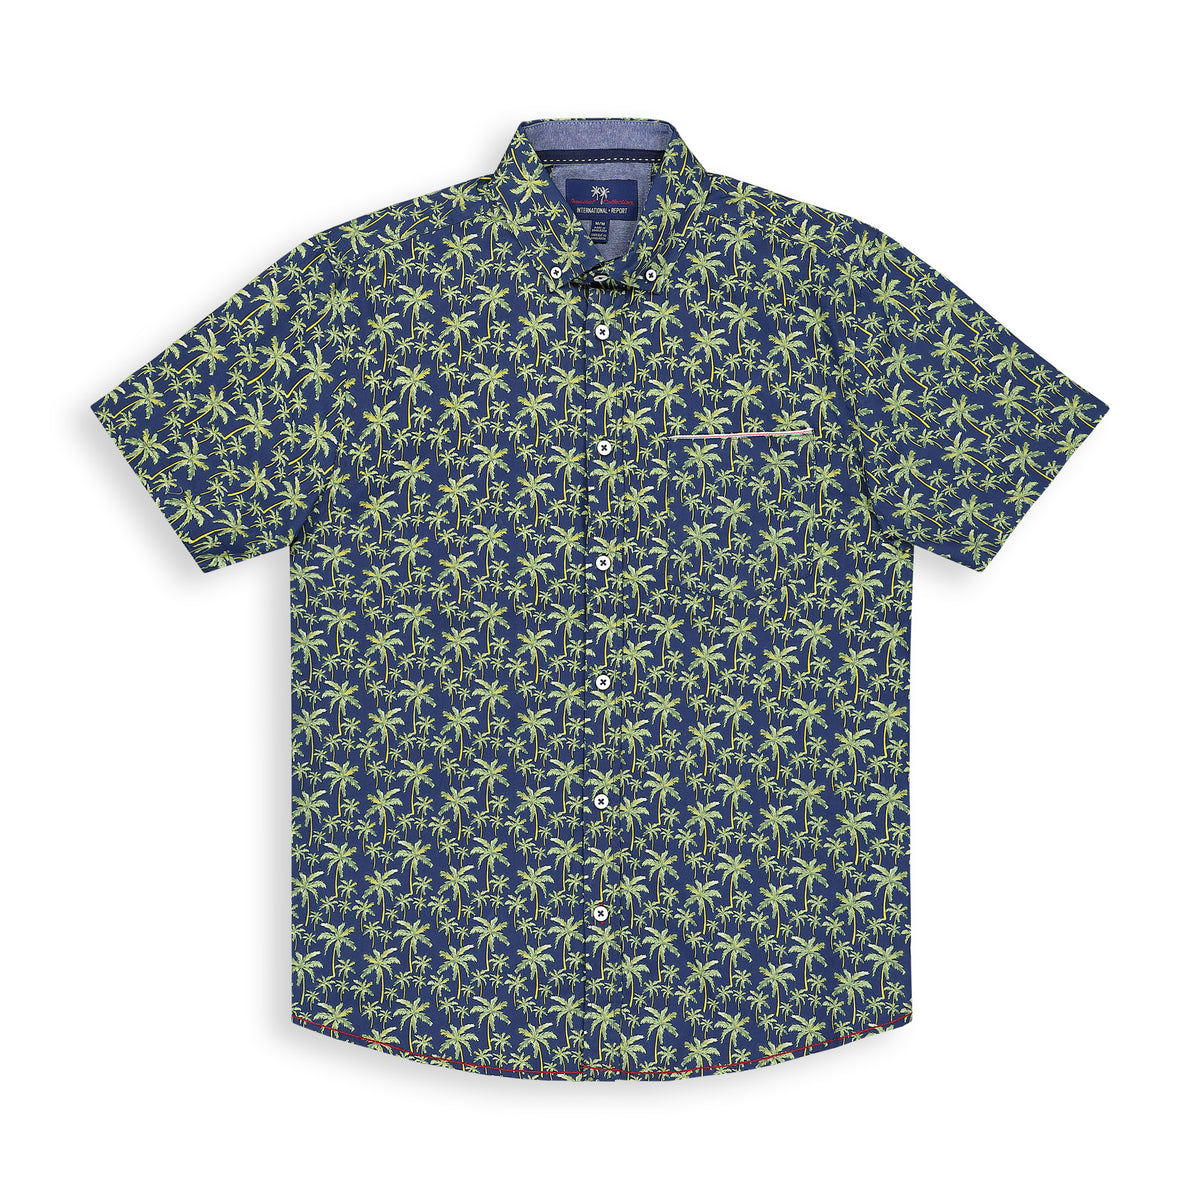 Front View of Short Sleeve Shirt with Palm Tree Print in Navy